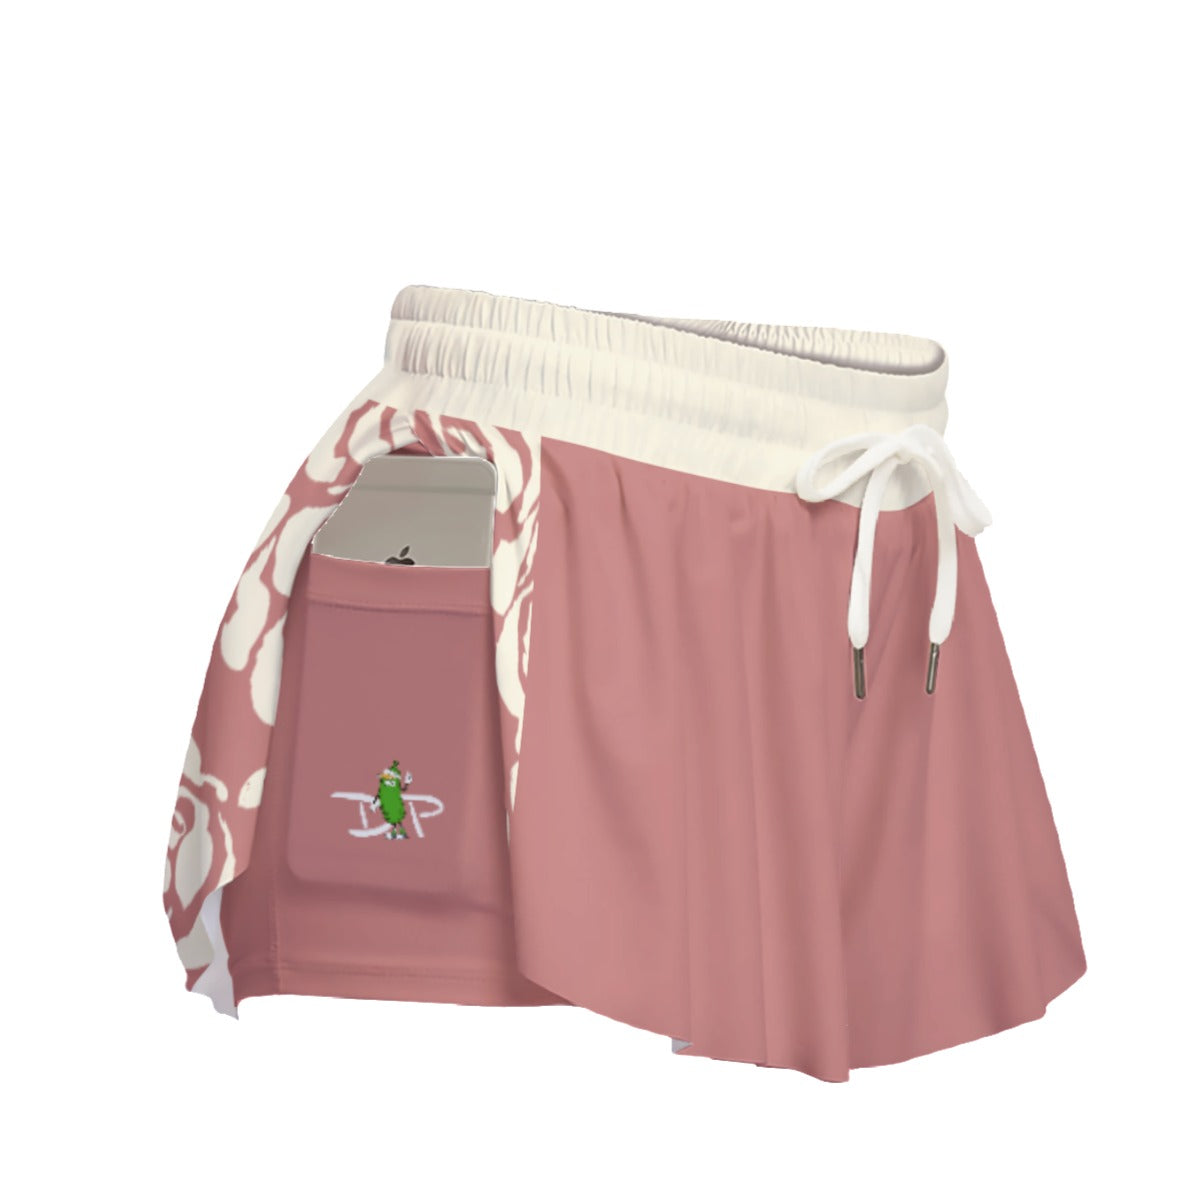 Vickie - Salmon - Bloom/Cream - Pickleball Women's Sport Culottes with Pockets by Dizzy Pickle